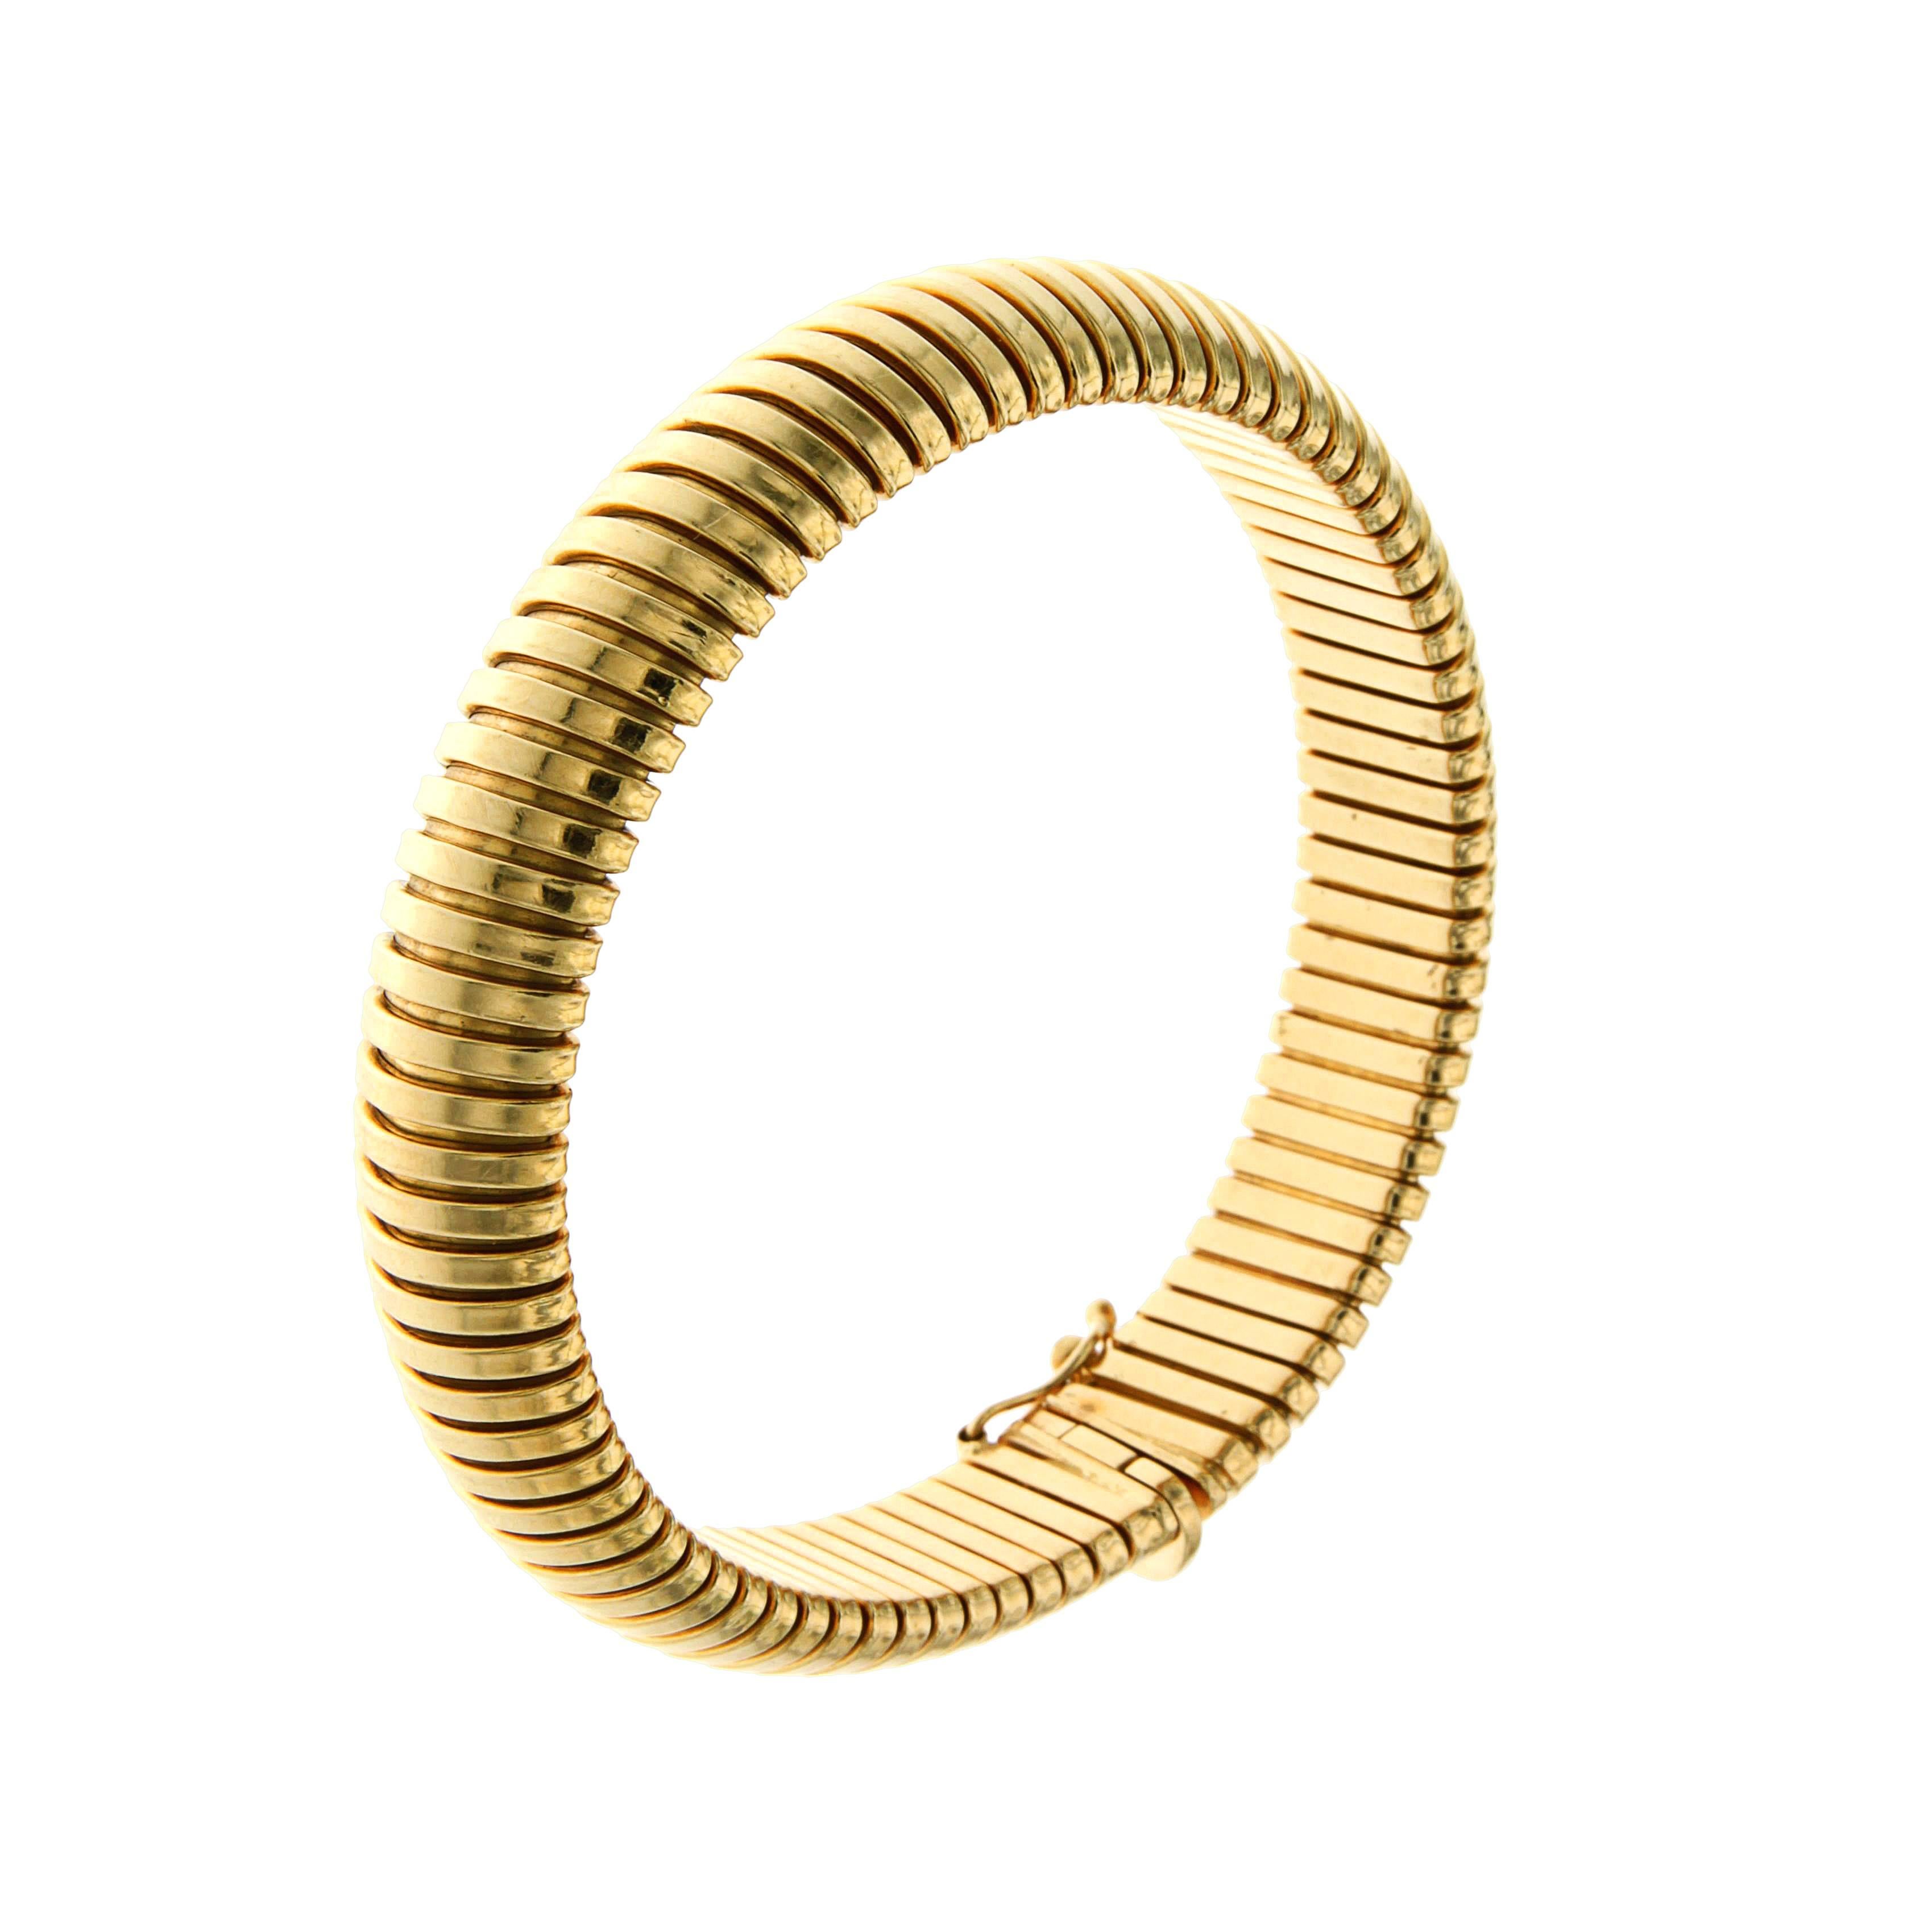 Italian 18K yellow Gold tubogas set.
Necklace width is 12 mm & 400 mm long
Bracelet width is 12 mm & length is 180 mm
18K Gold, total weight is 132 grams
Made in Italy
